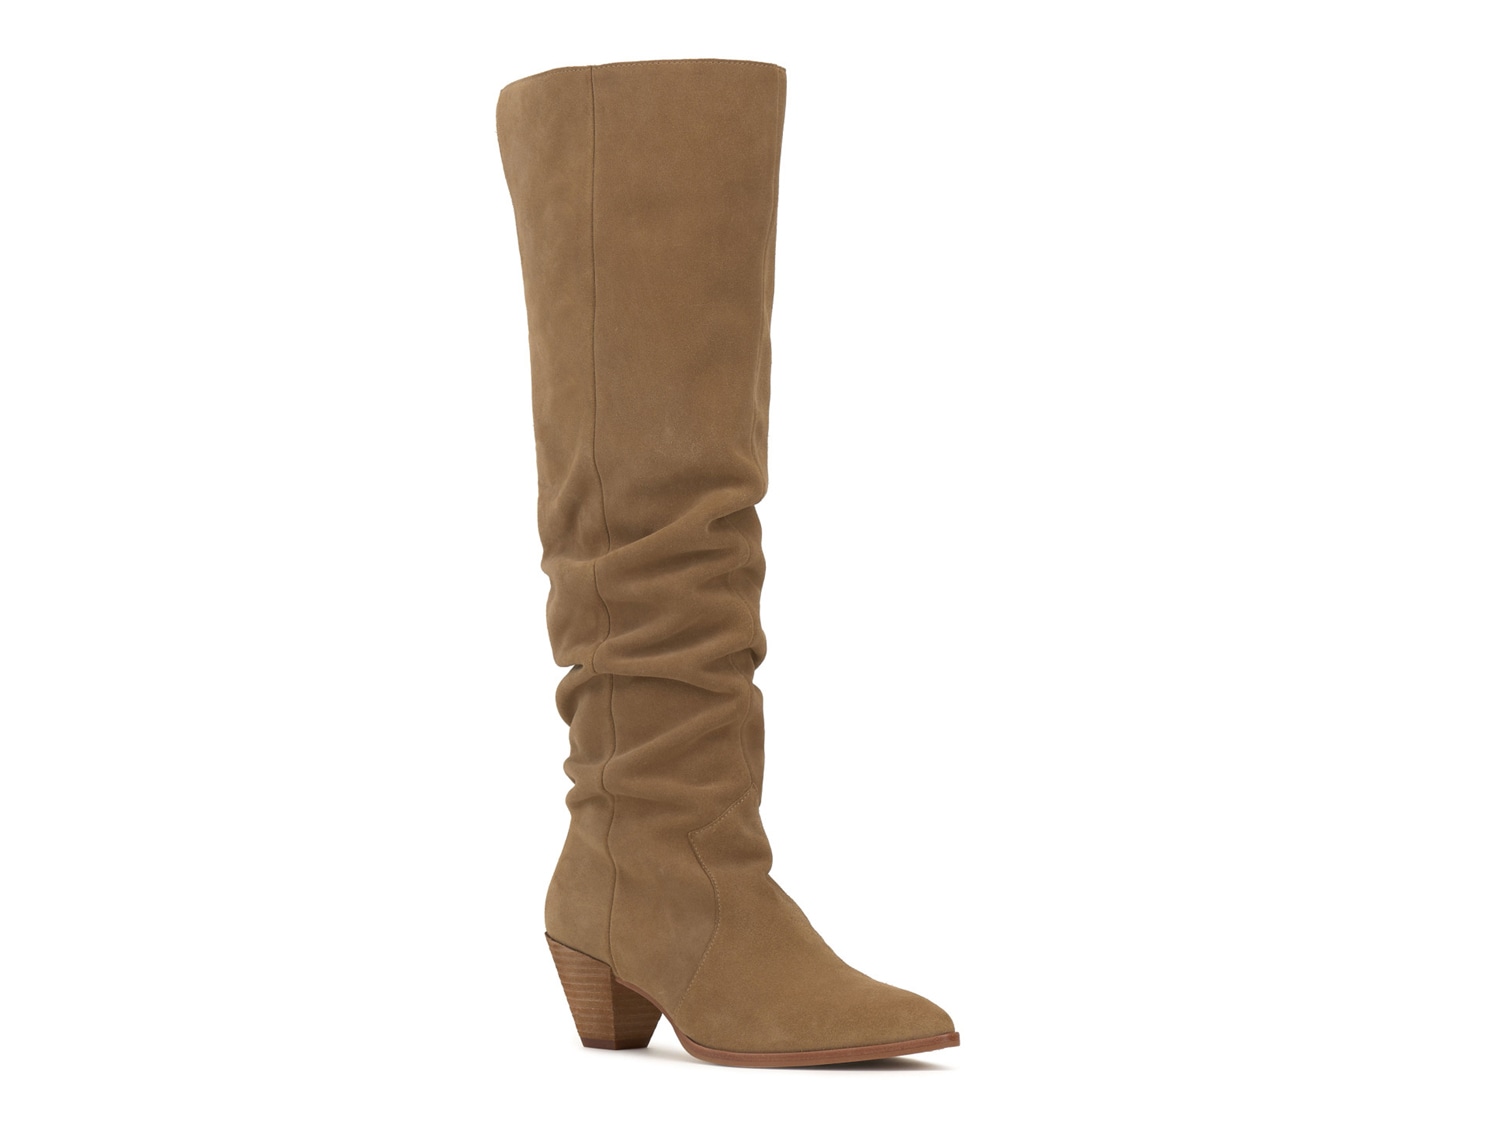 Vince Camuto Sewinny Wide Calf Boot - Free Shipping | DSW